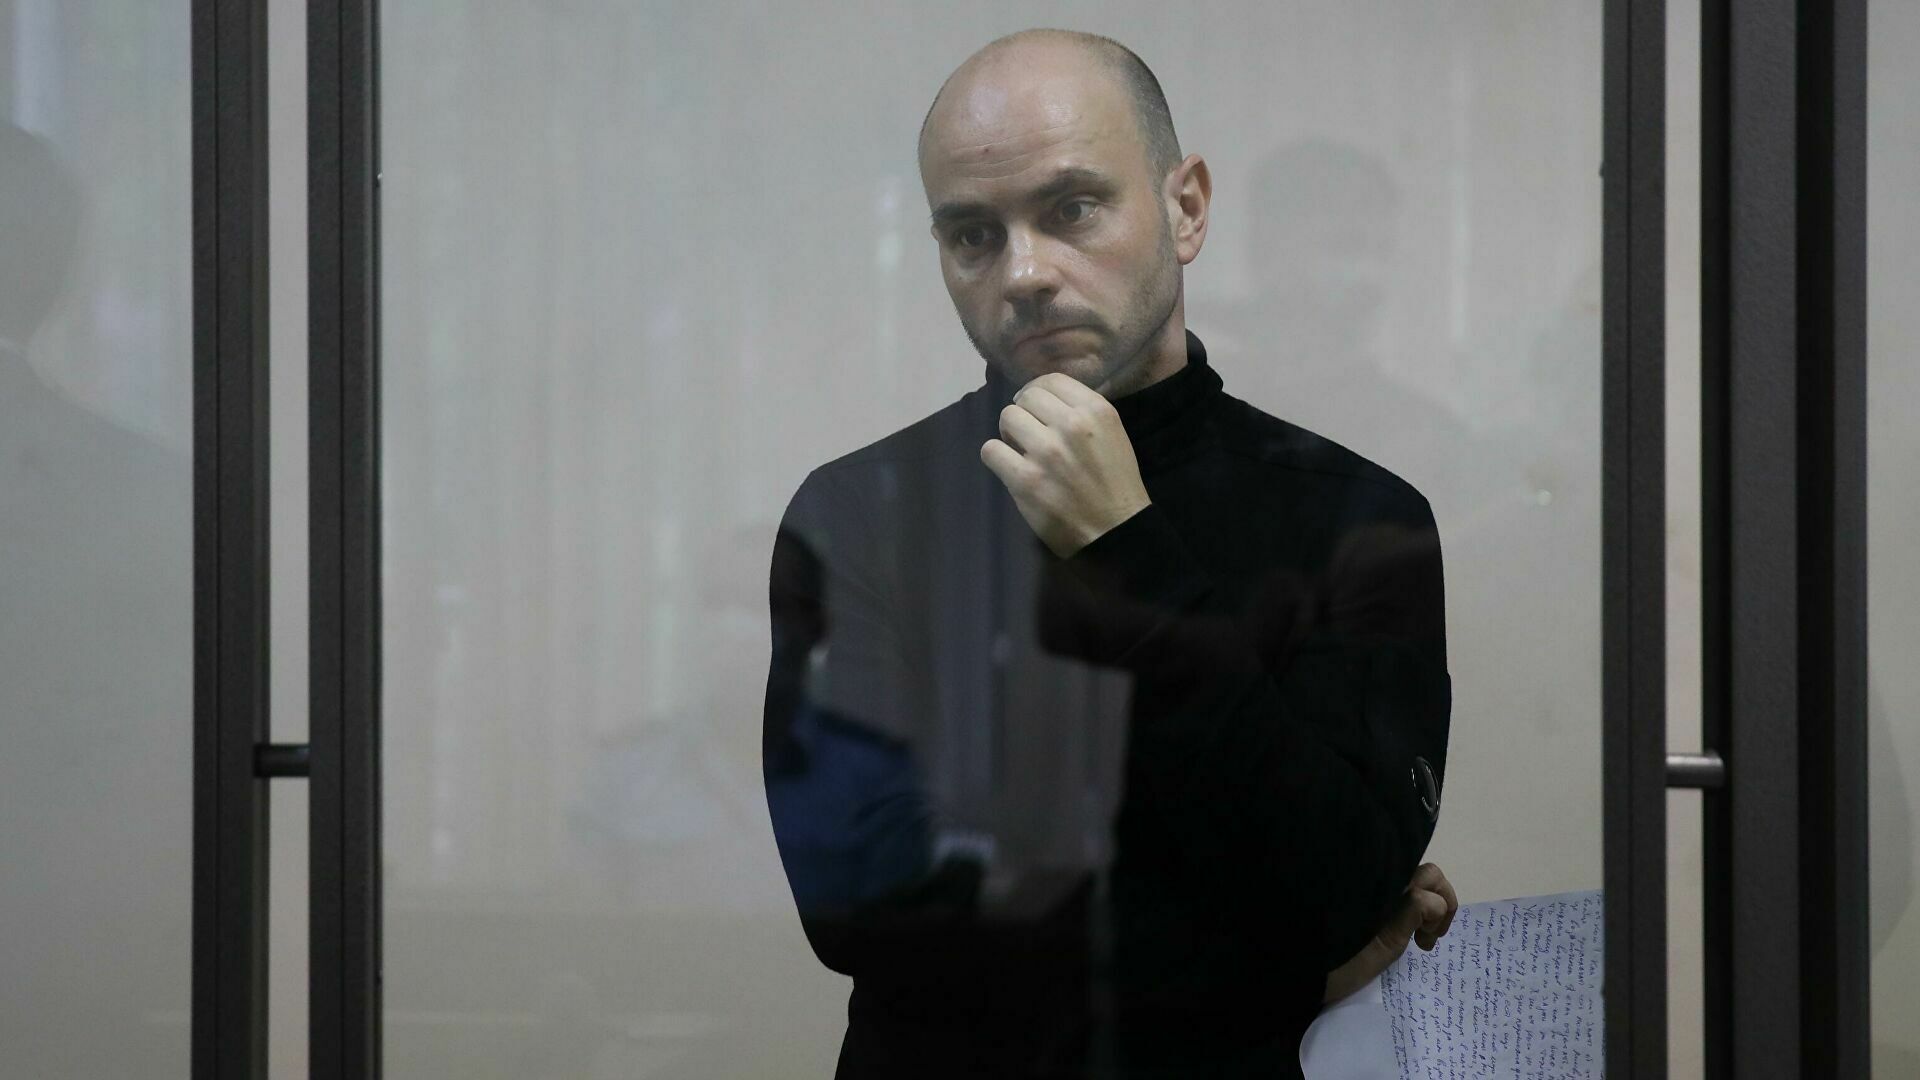 One more case was brought up against the ex-director of "Open Russia" Andrey Pivovarov